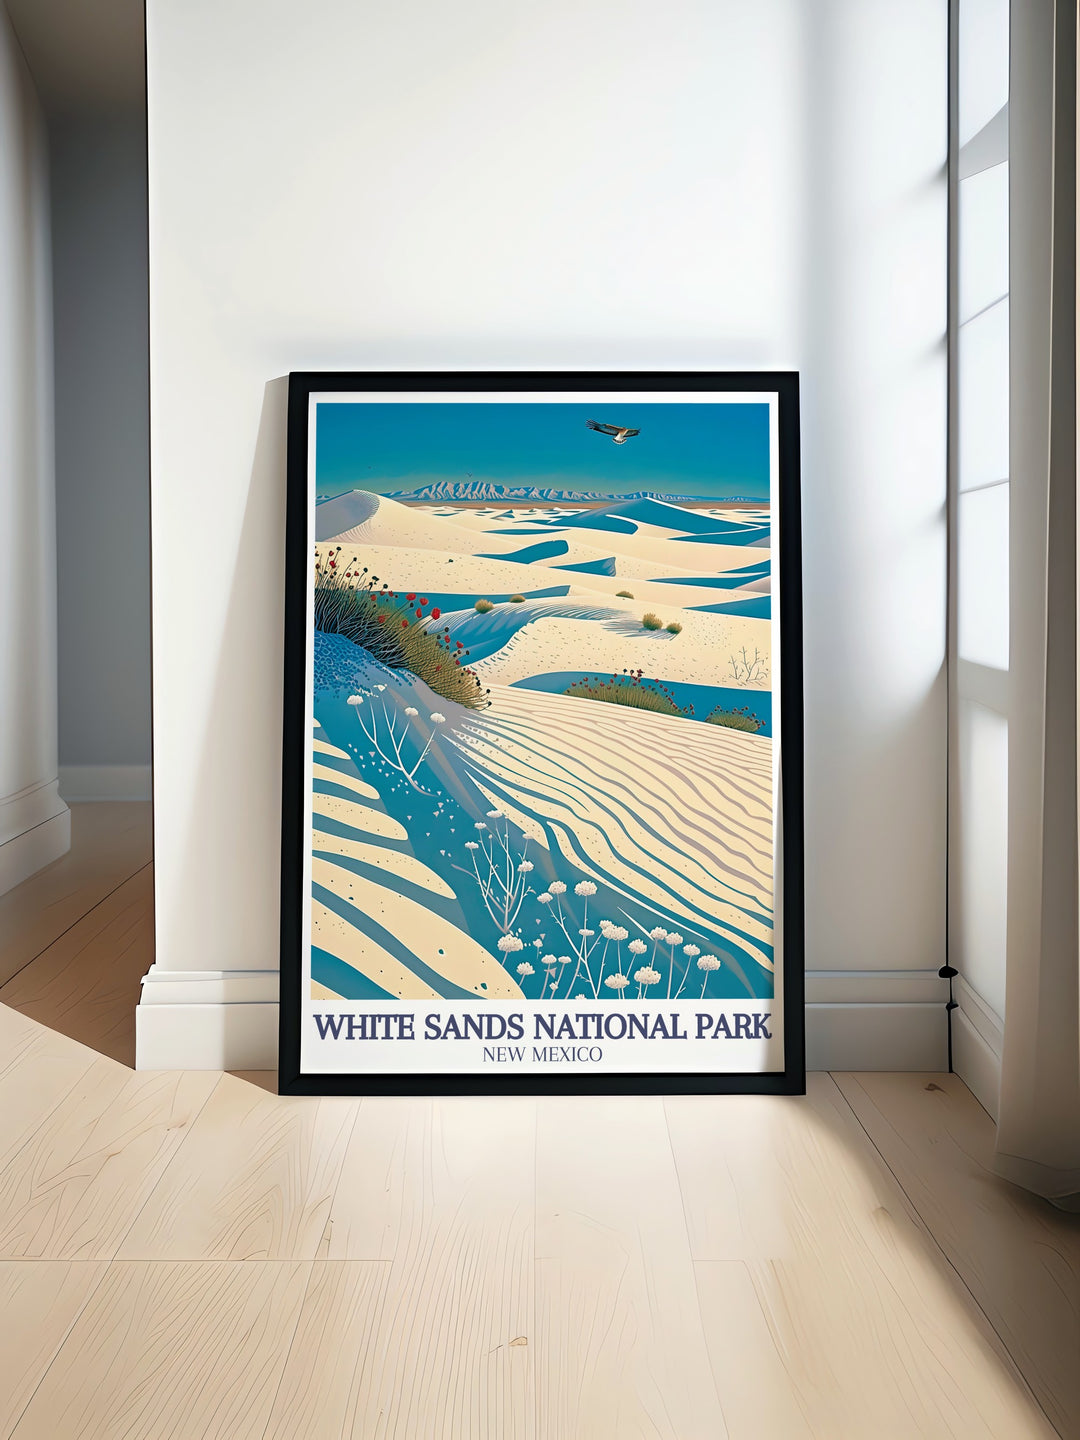 White Sands National Park art print featuring the stunning Sacramento Mountains and the vast Chihuahuan Desert perfect for enhancing home decor and bringing the serene beauty of nature into your living space ideal for travel enthusiasts and art lovers.